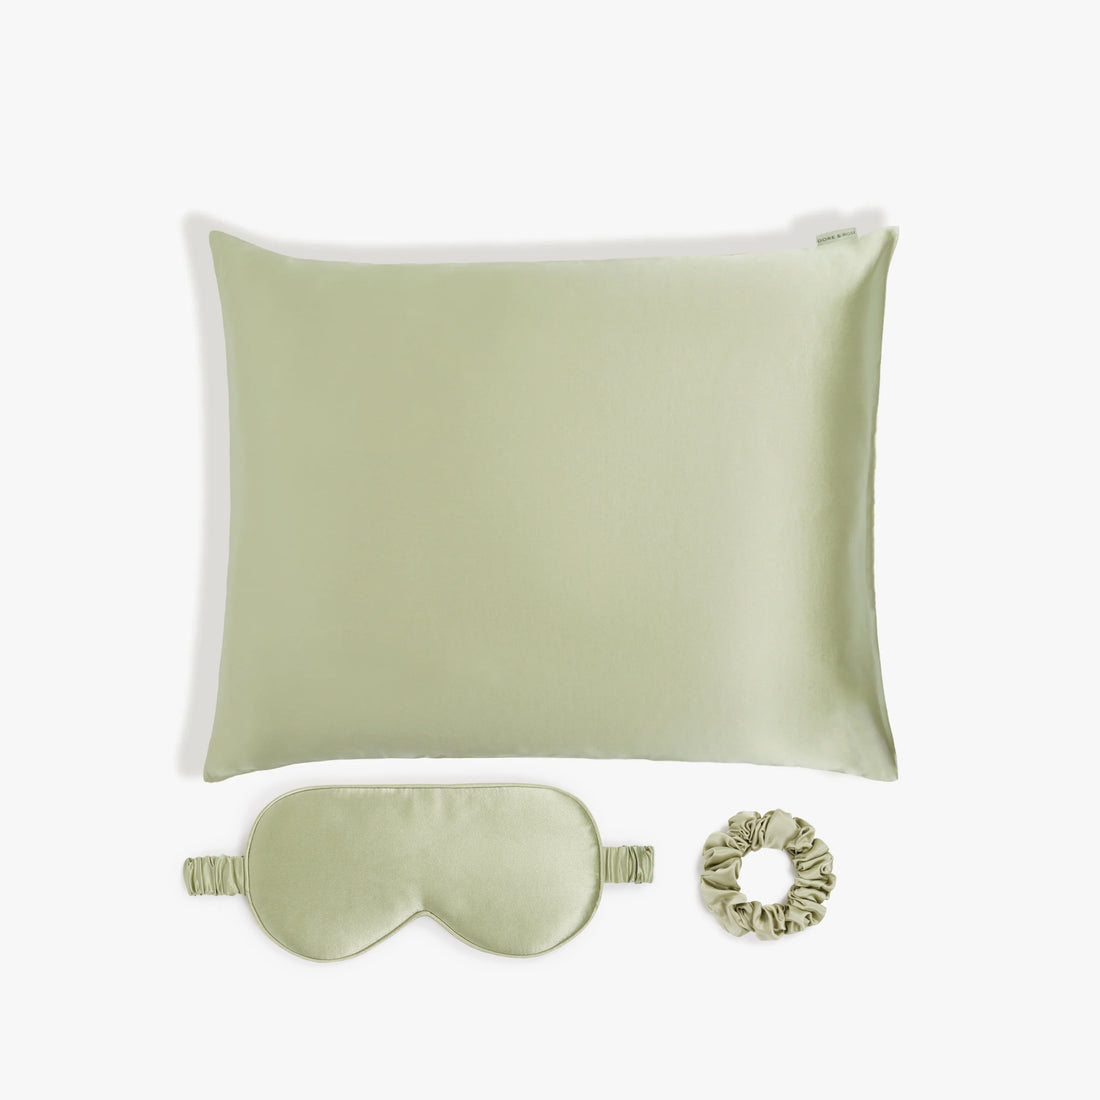 Skin Recovering™ Sleep Bundle with Pillowcase. Eye Mask and Scrunchie from Dore and Rose in the color Olive Green